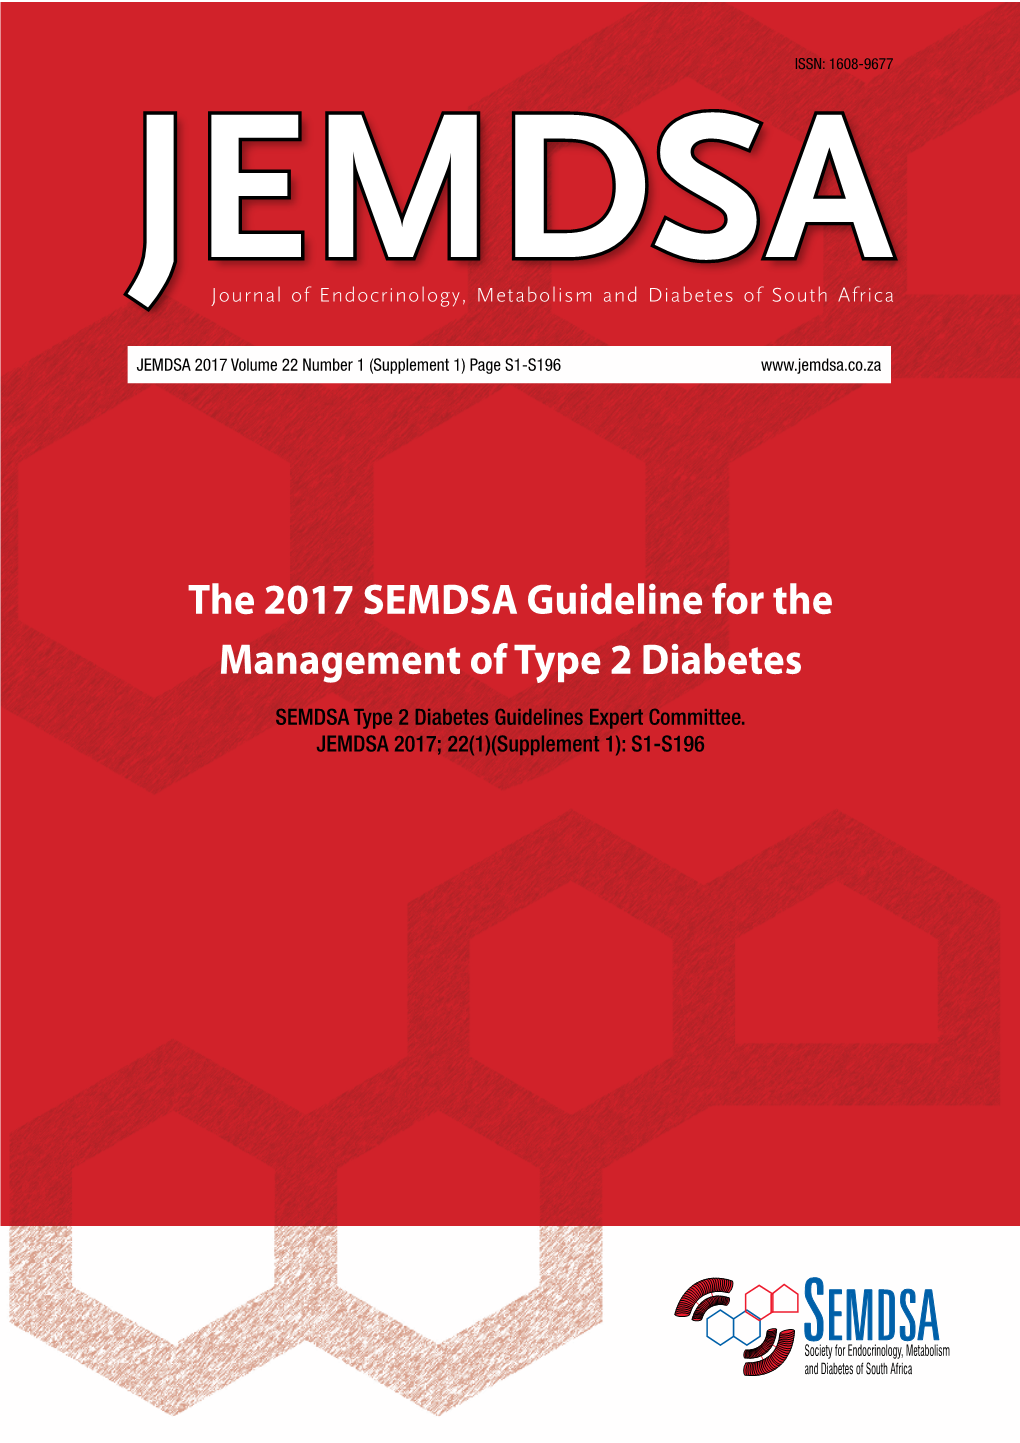 The 2017 SEMDSA Guideline for Management of Type 2 Diabetes